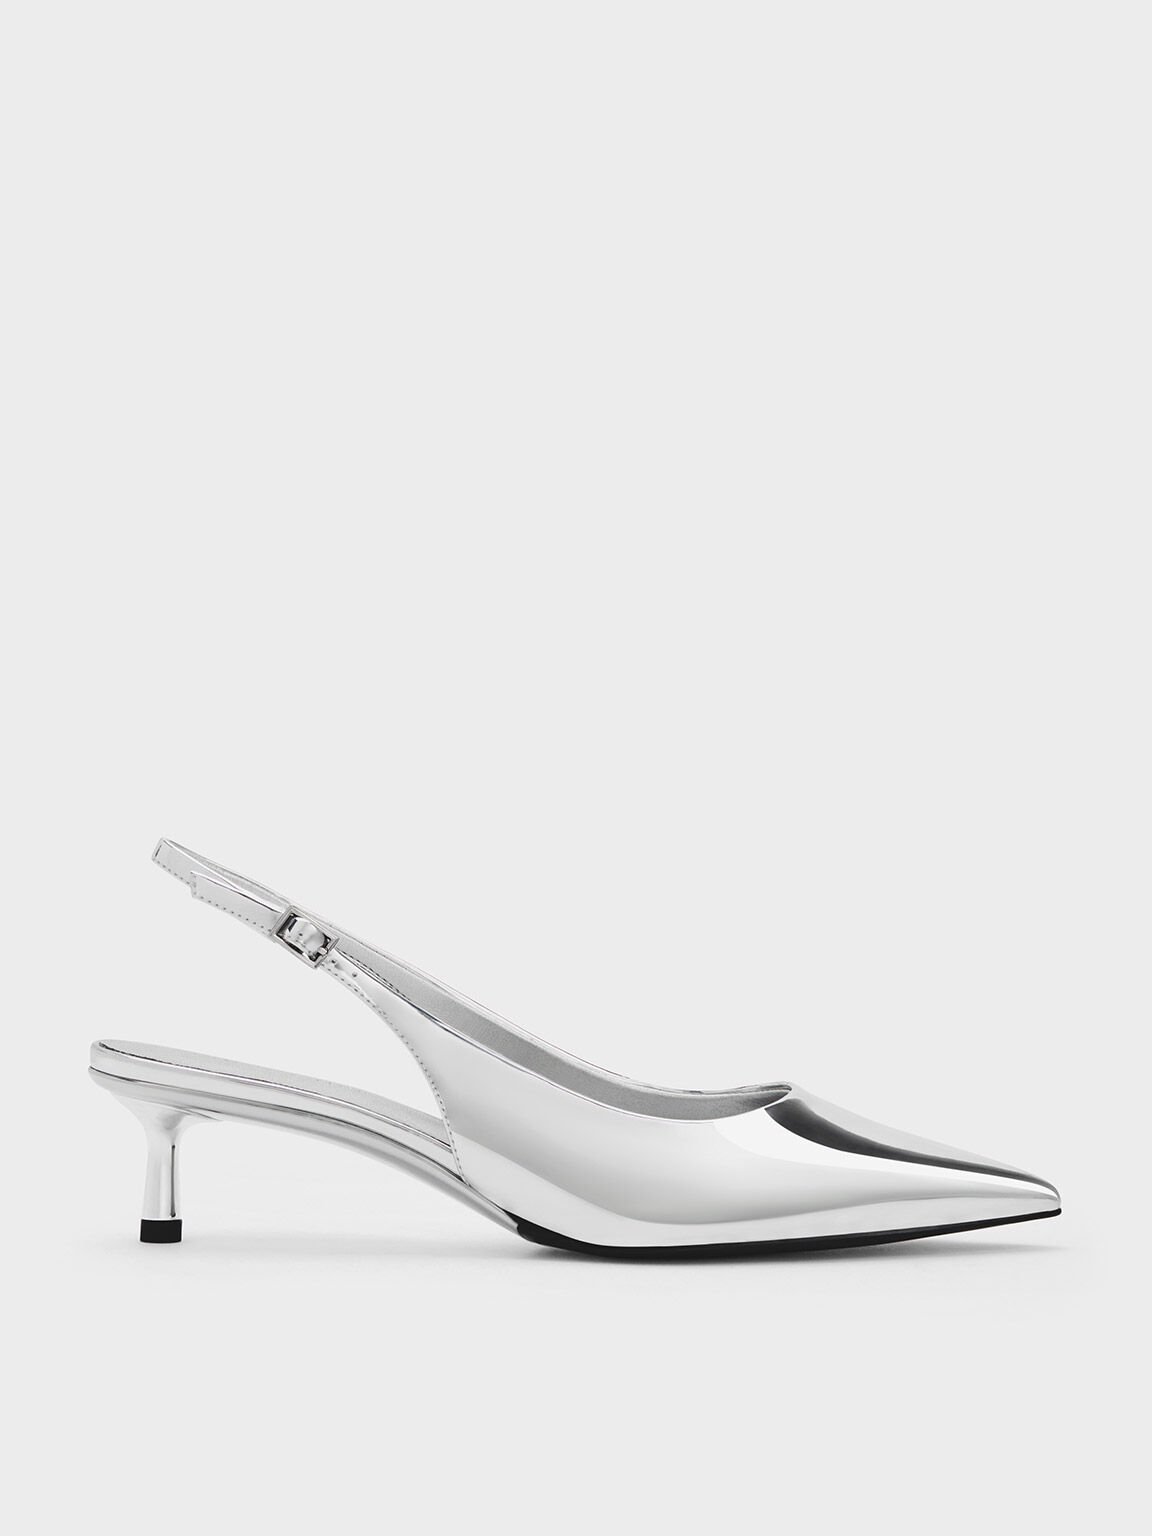 Silver Metallic Pointed-Toe Slingback Pumps - CHARLES & KEITH SG